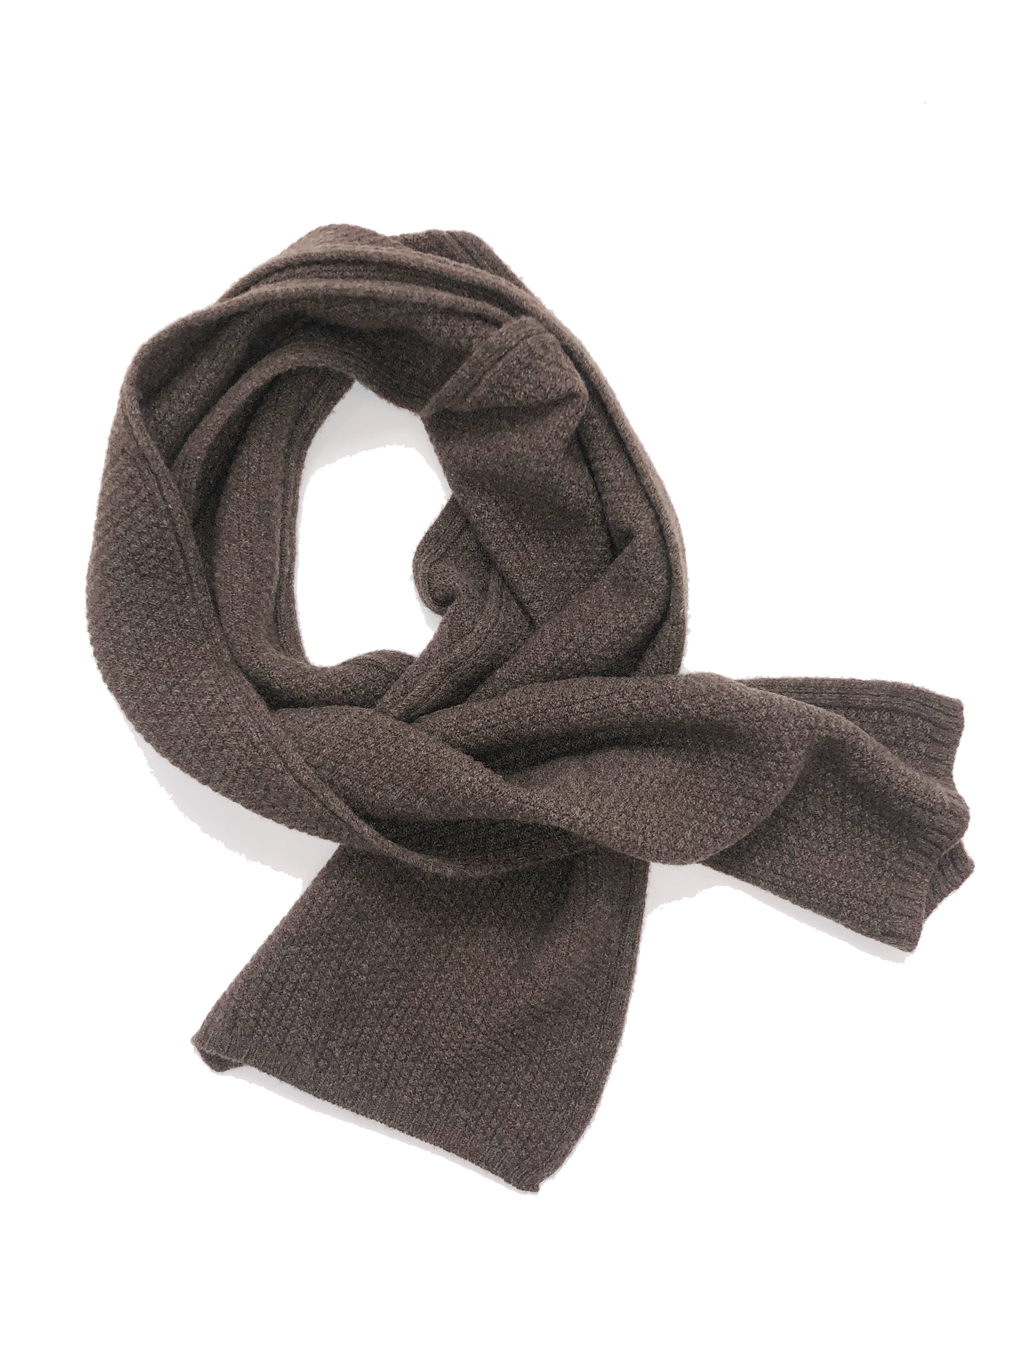 Knitted Scarf - Chocolate